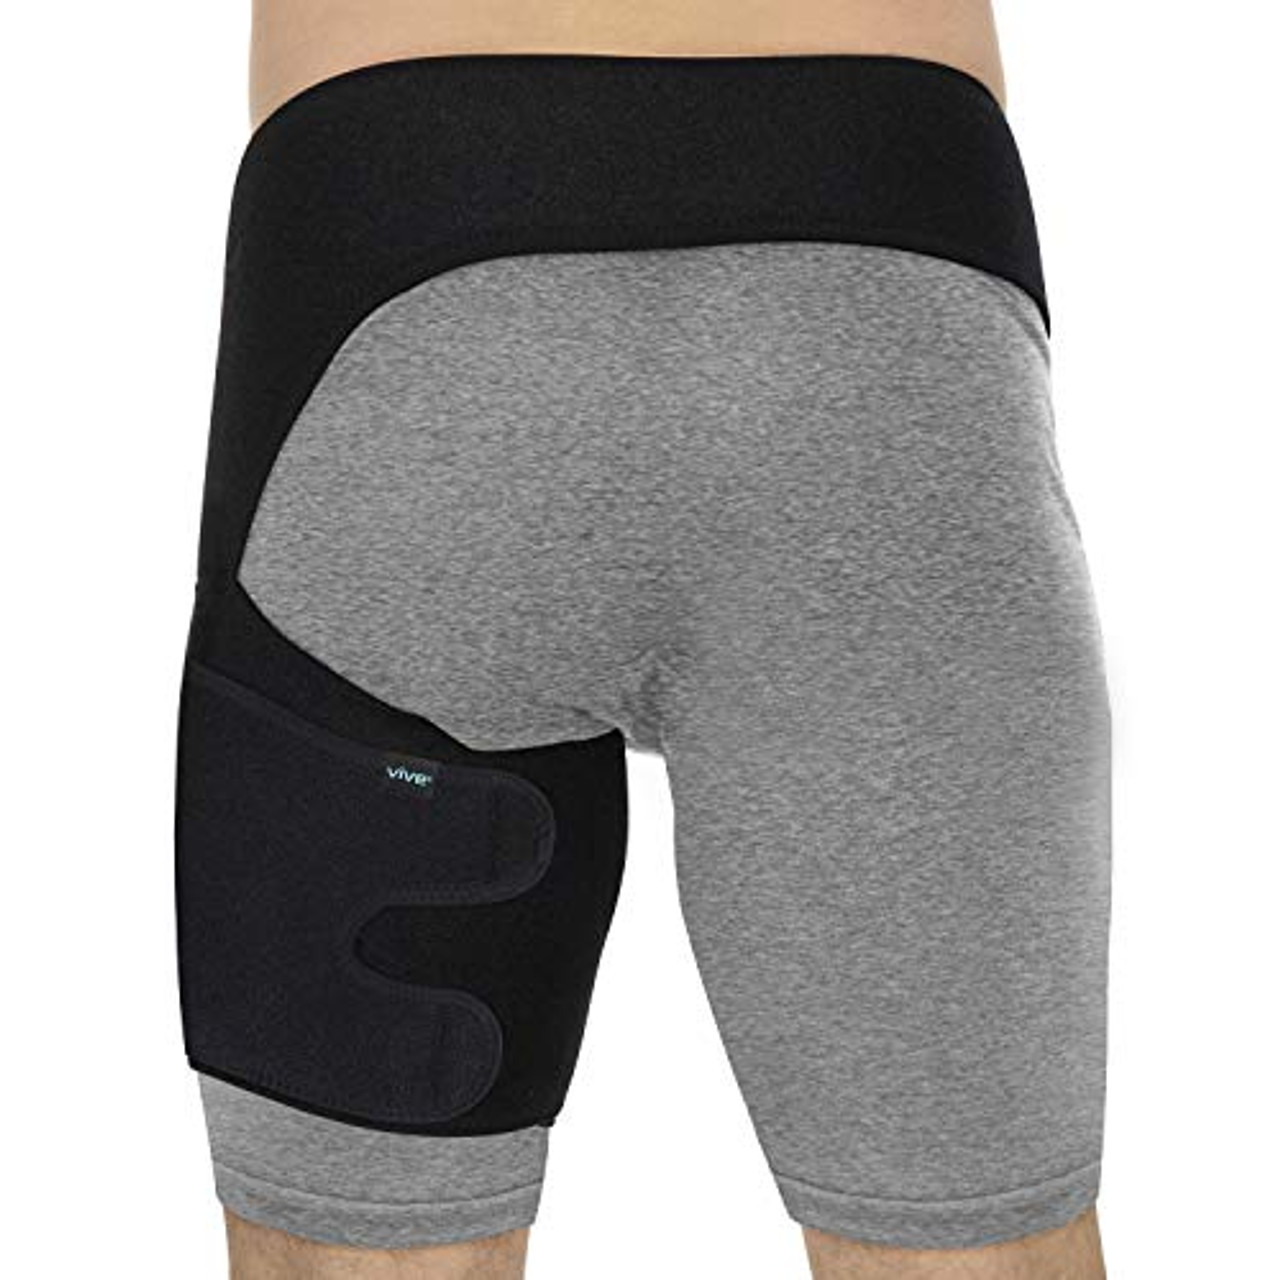 Copper Compression Groin Thigh Sleeve Hip Support Wrap. Adjustable